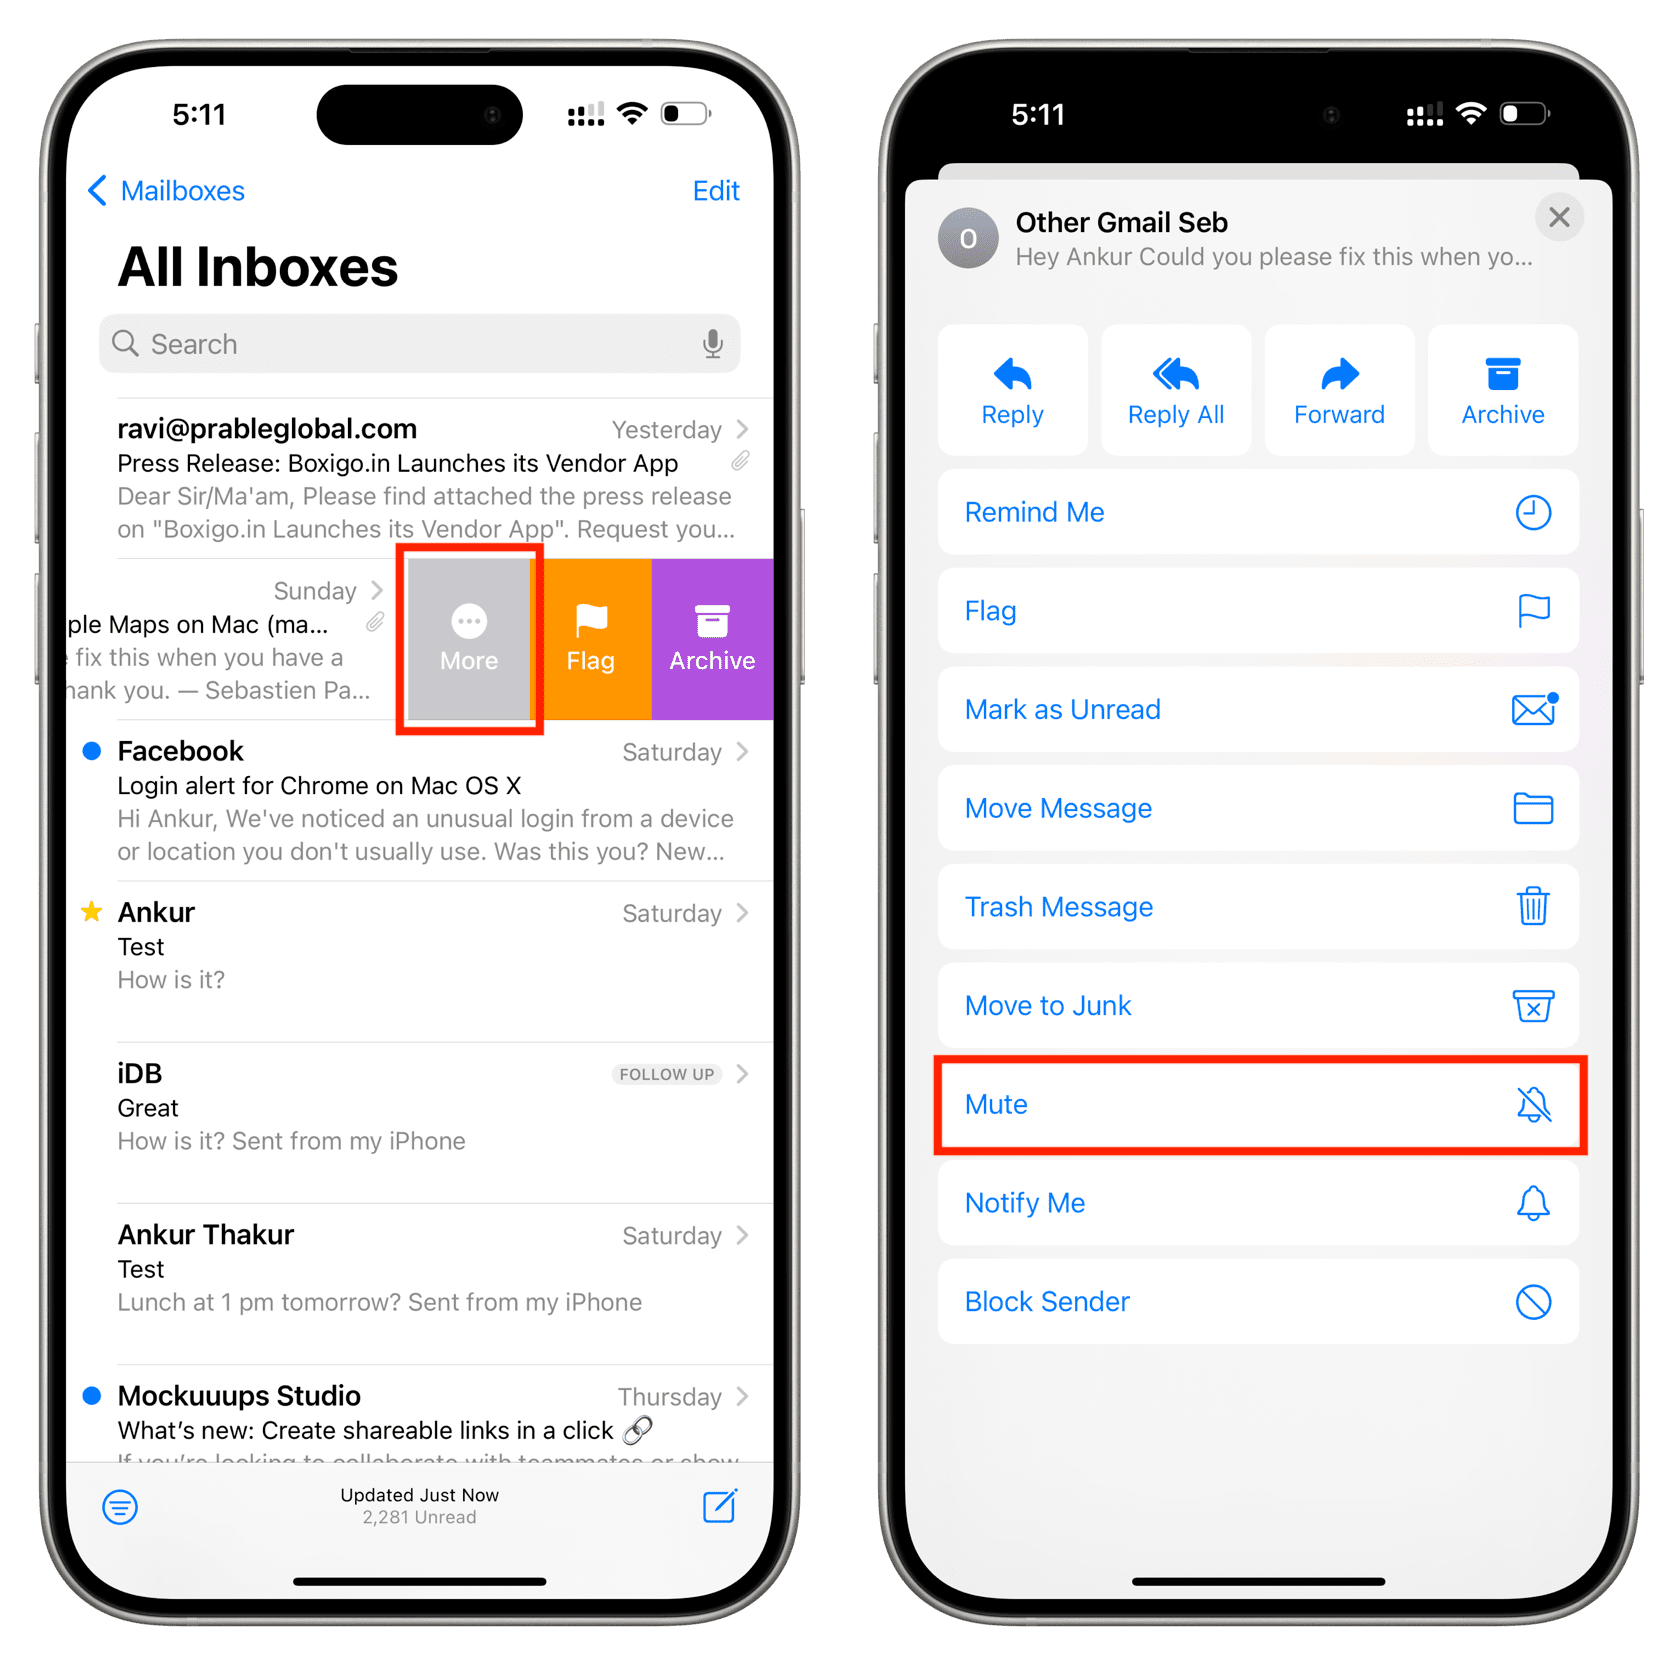 Mute email threads on iPhone